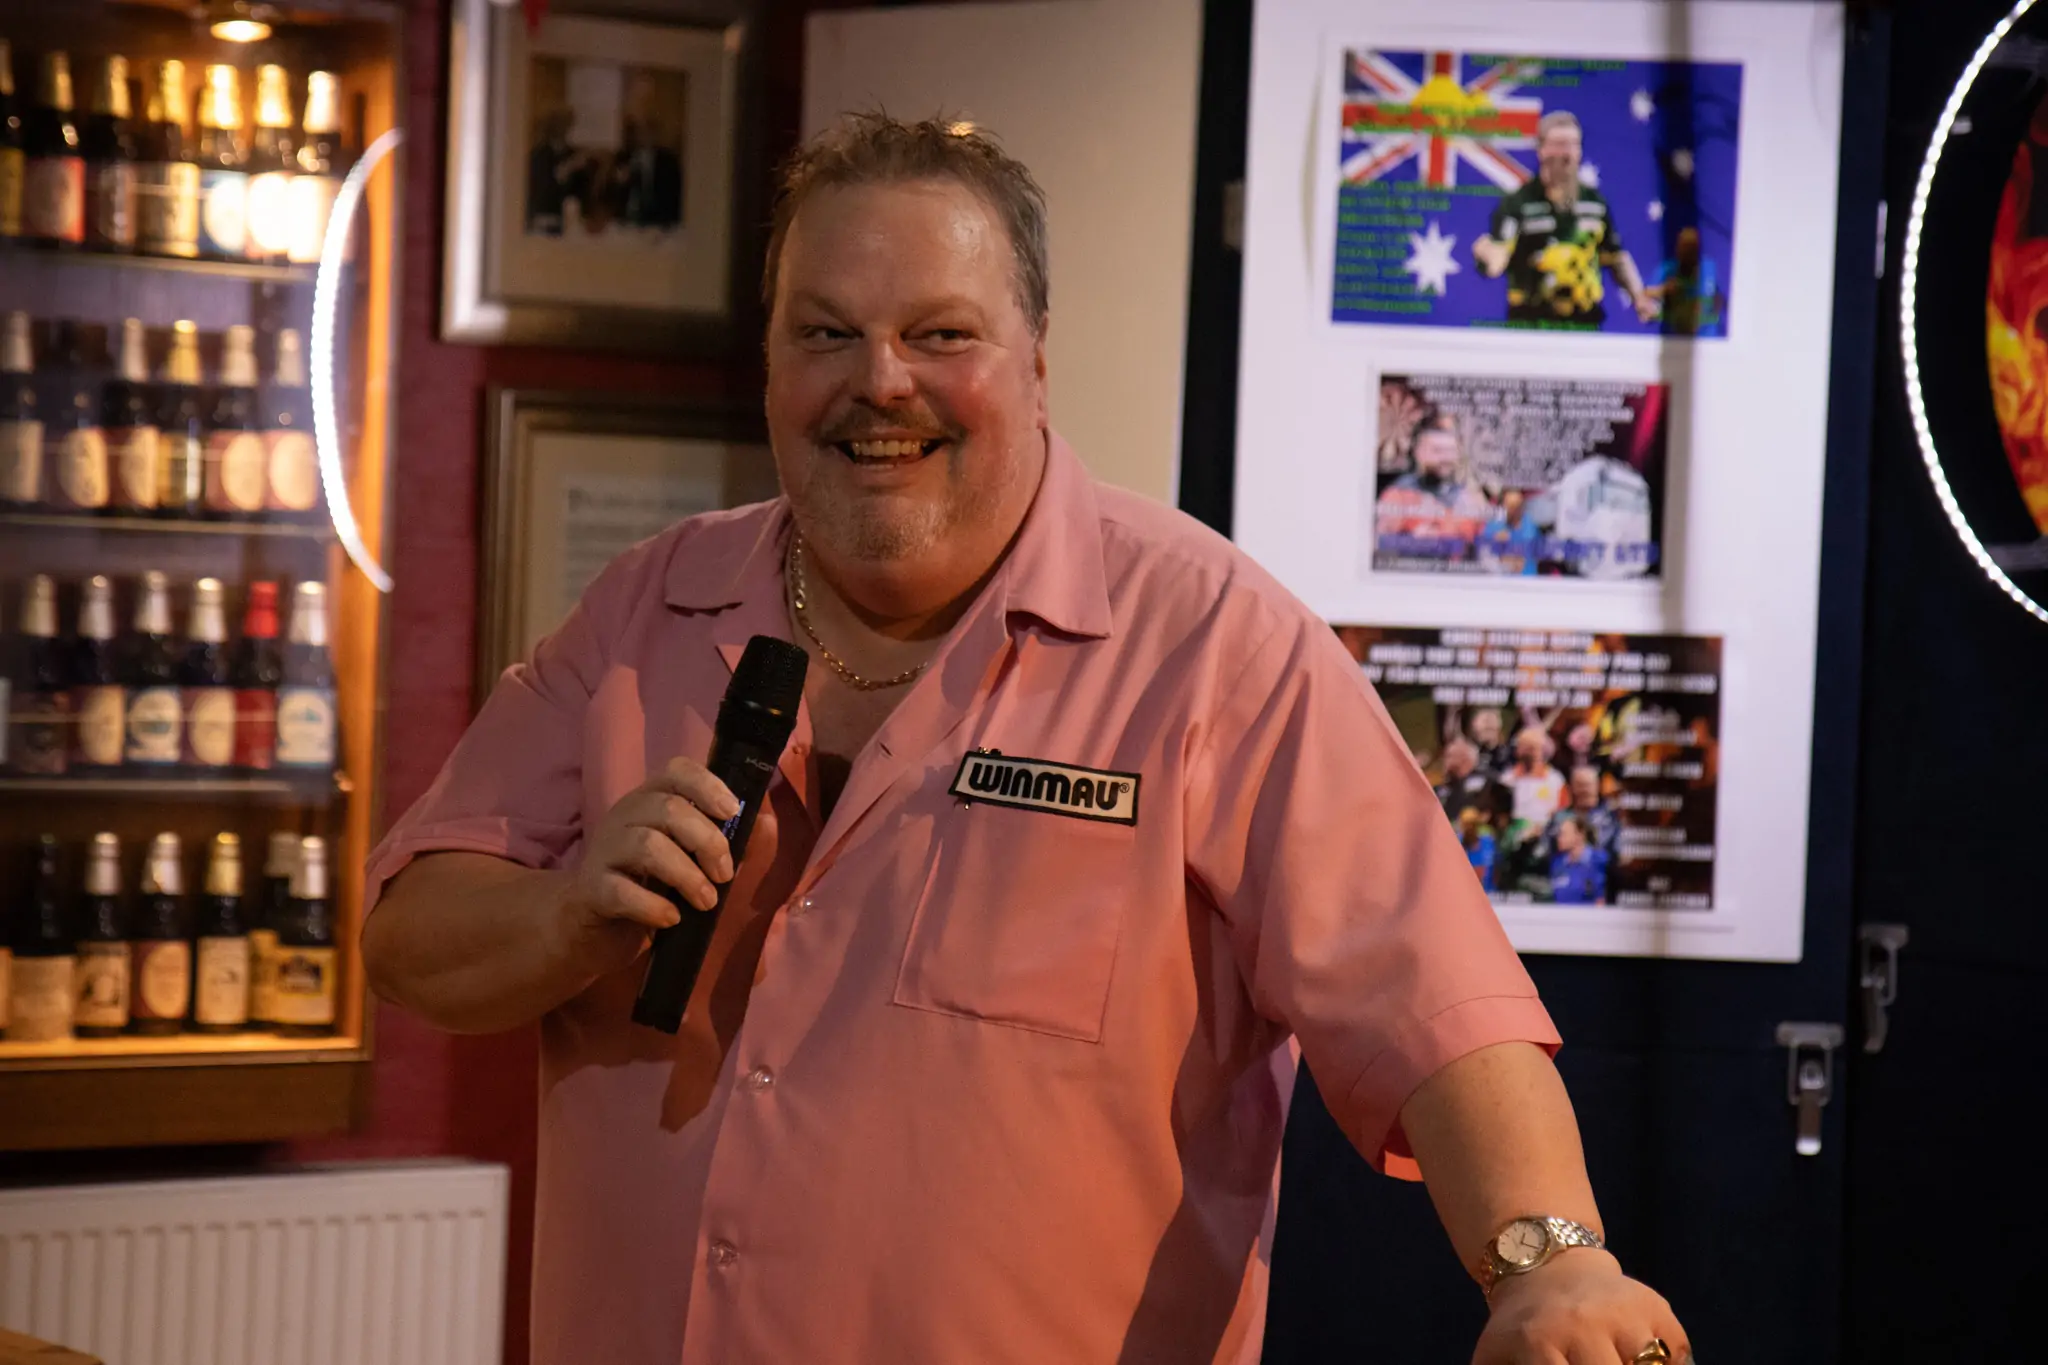 Peter Manley Pro Darts Player at the Batemans 150th anniversary celebrations darts competition talking on a microphone.